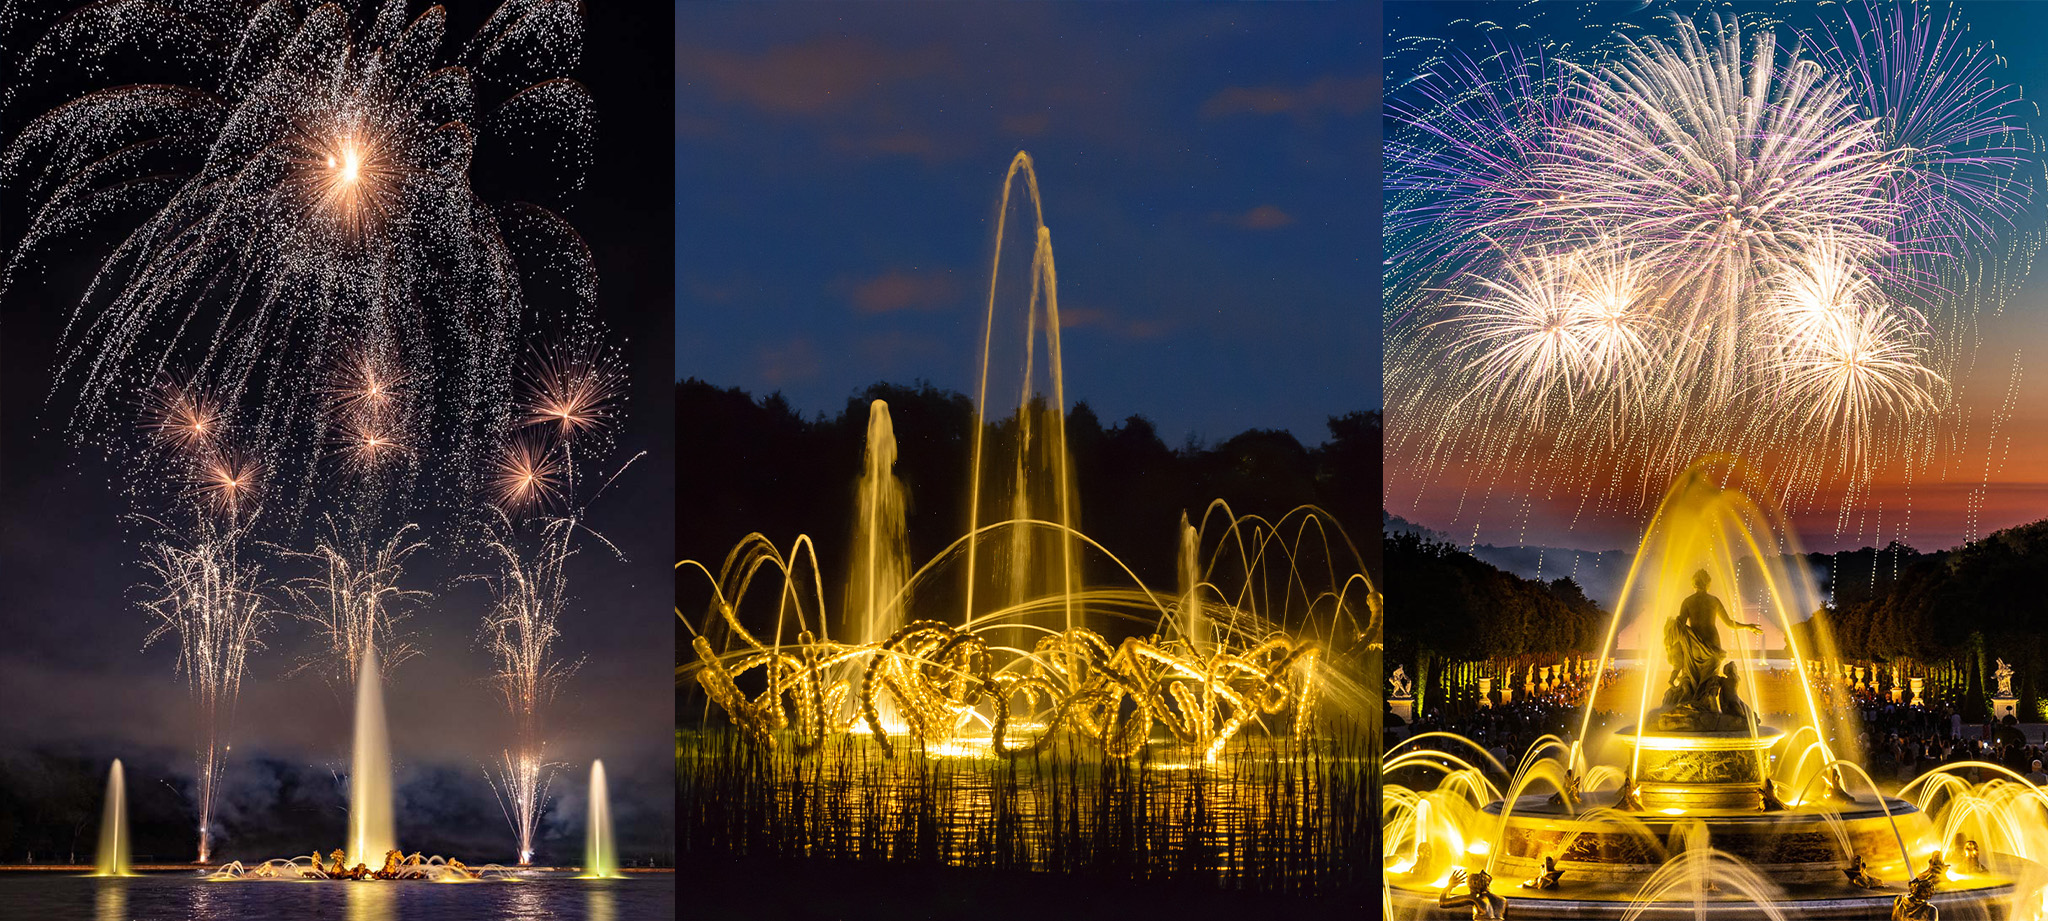 The Night Fountains Show at the Palace of Versailles: firewords at the palace of versailles, Chateau de versailles, in the gardens with fountains. © Nicolas Chavance